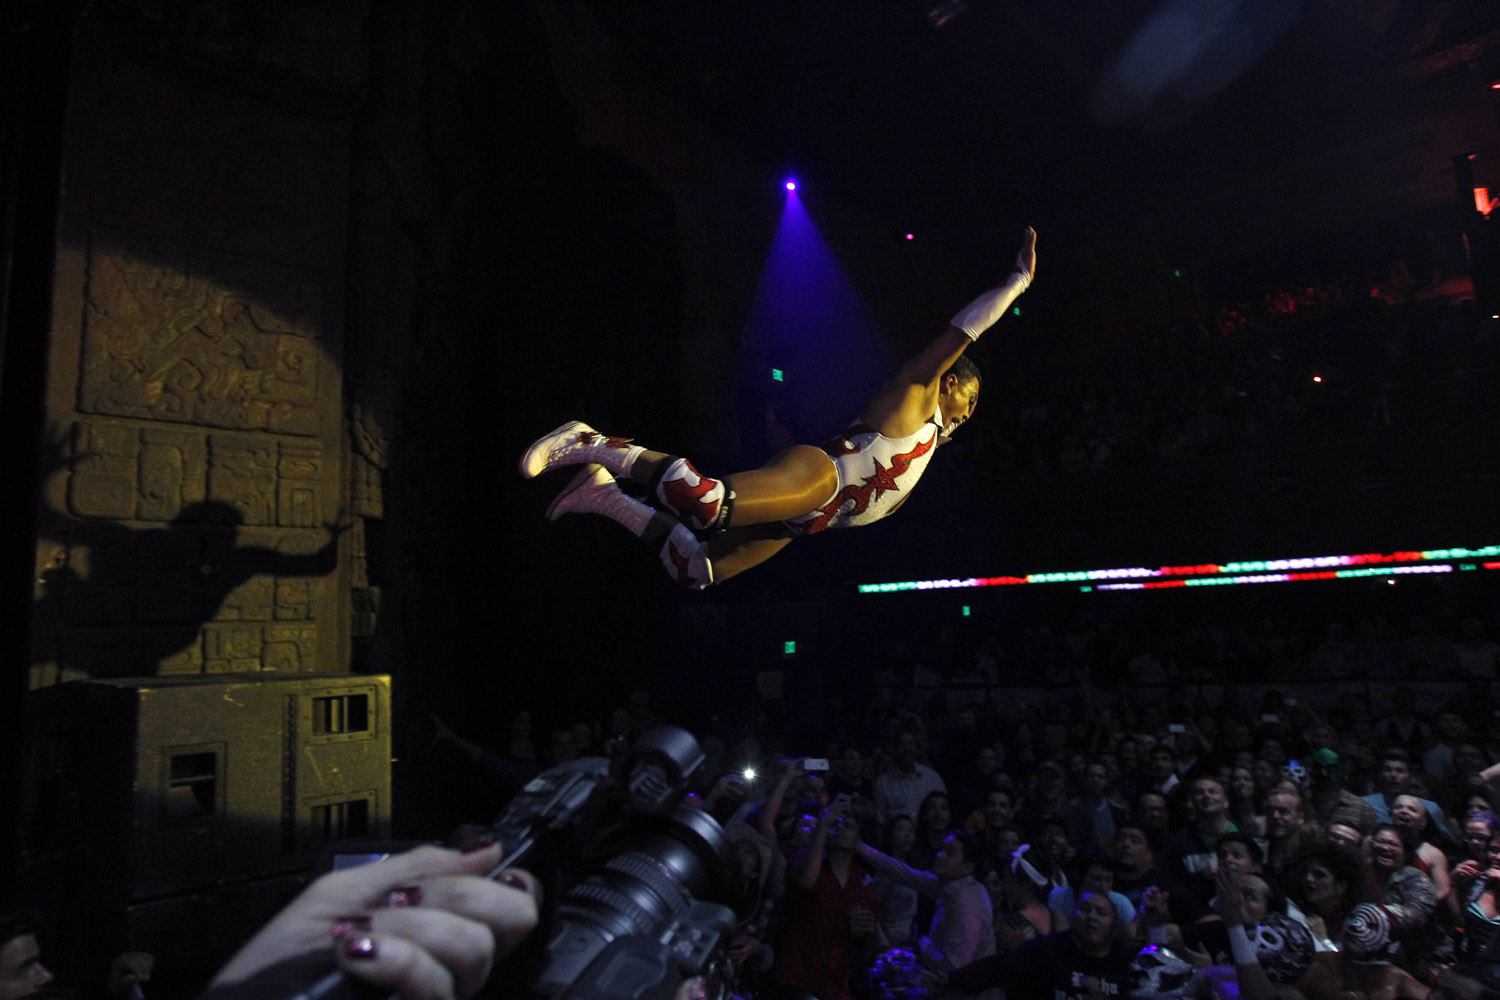 Lucha libre wrestler Cassandro leaps into the audience during the Lucha VaVOOM show as part of a Cinco de Mayo celebration at the Mayan theatre in Los Angeles